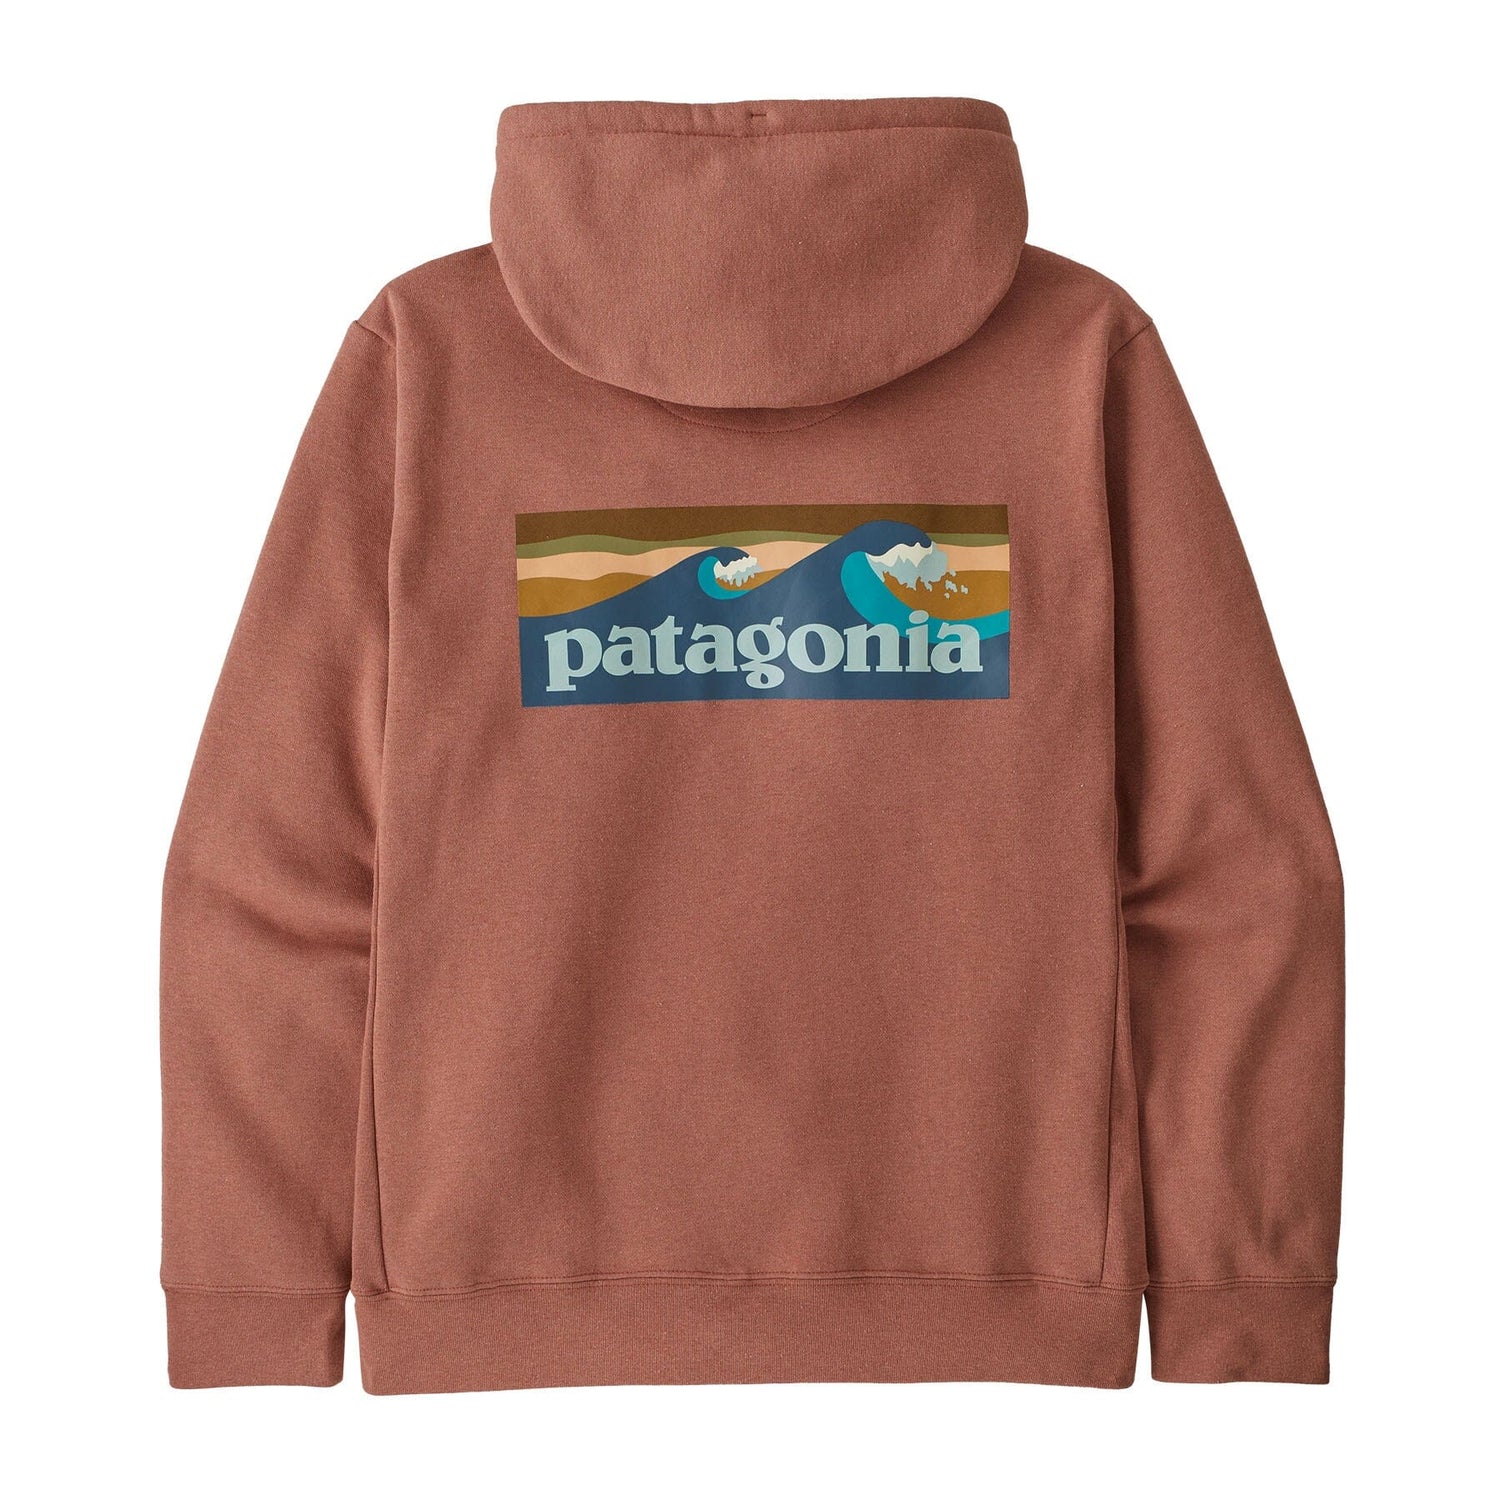 Patagonia Boardshort Logo Uprisal Hoody - Recycled polyester & recycled cotton fleece Sienna Clay Shirt